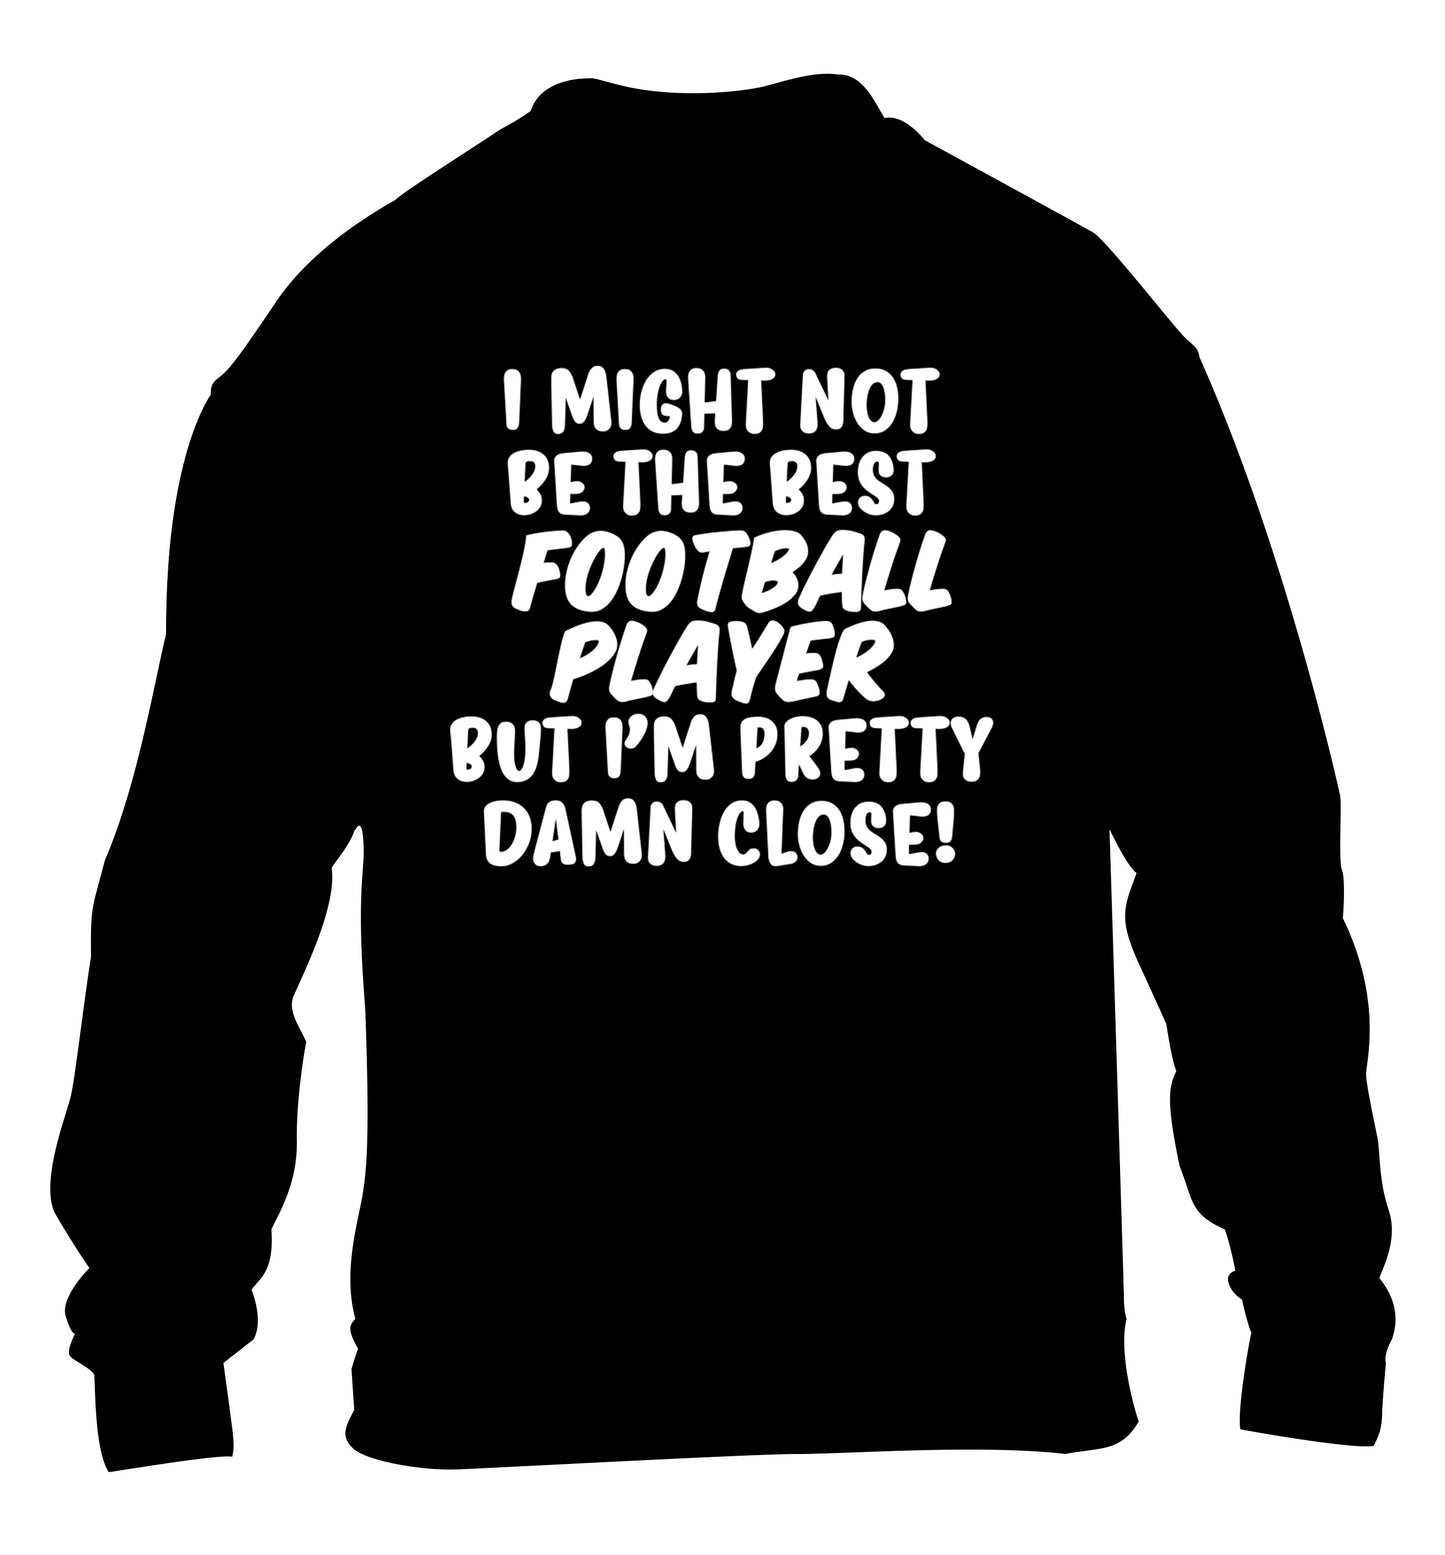 I might not be the best football player but I'm pretty close! children's black sweater 12-14 Years